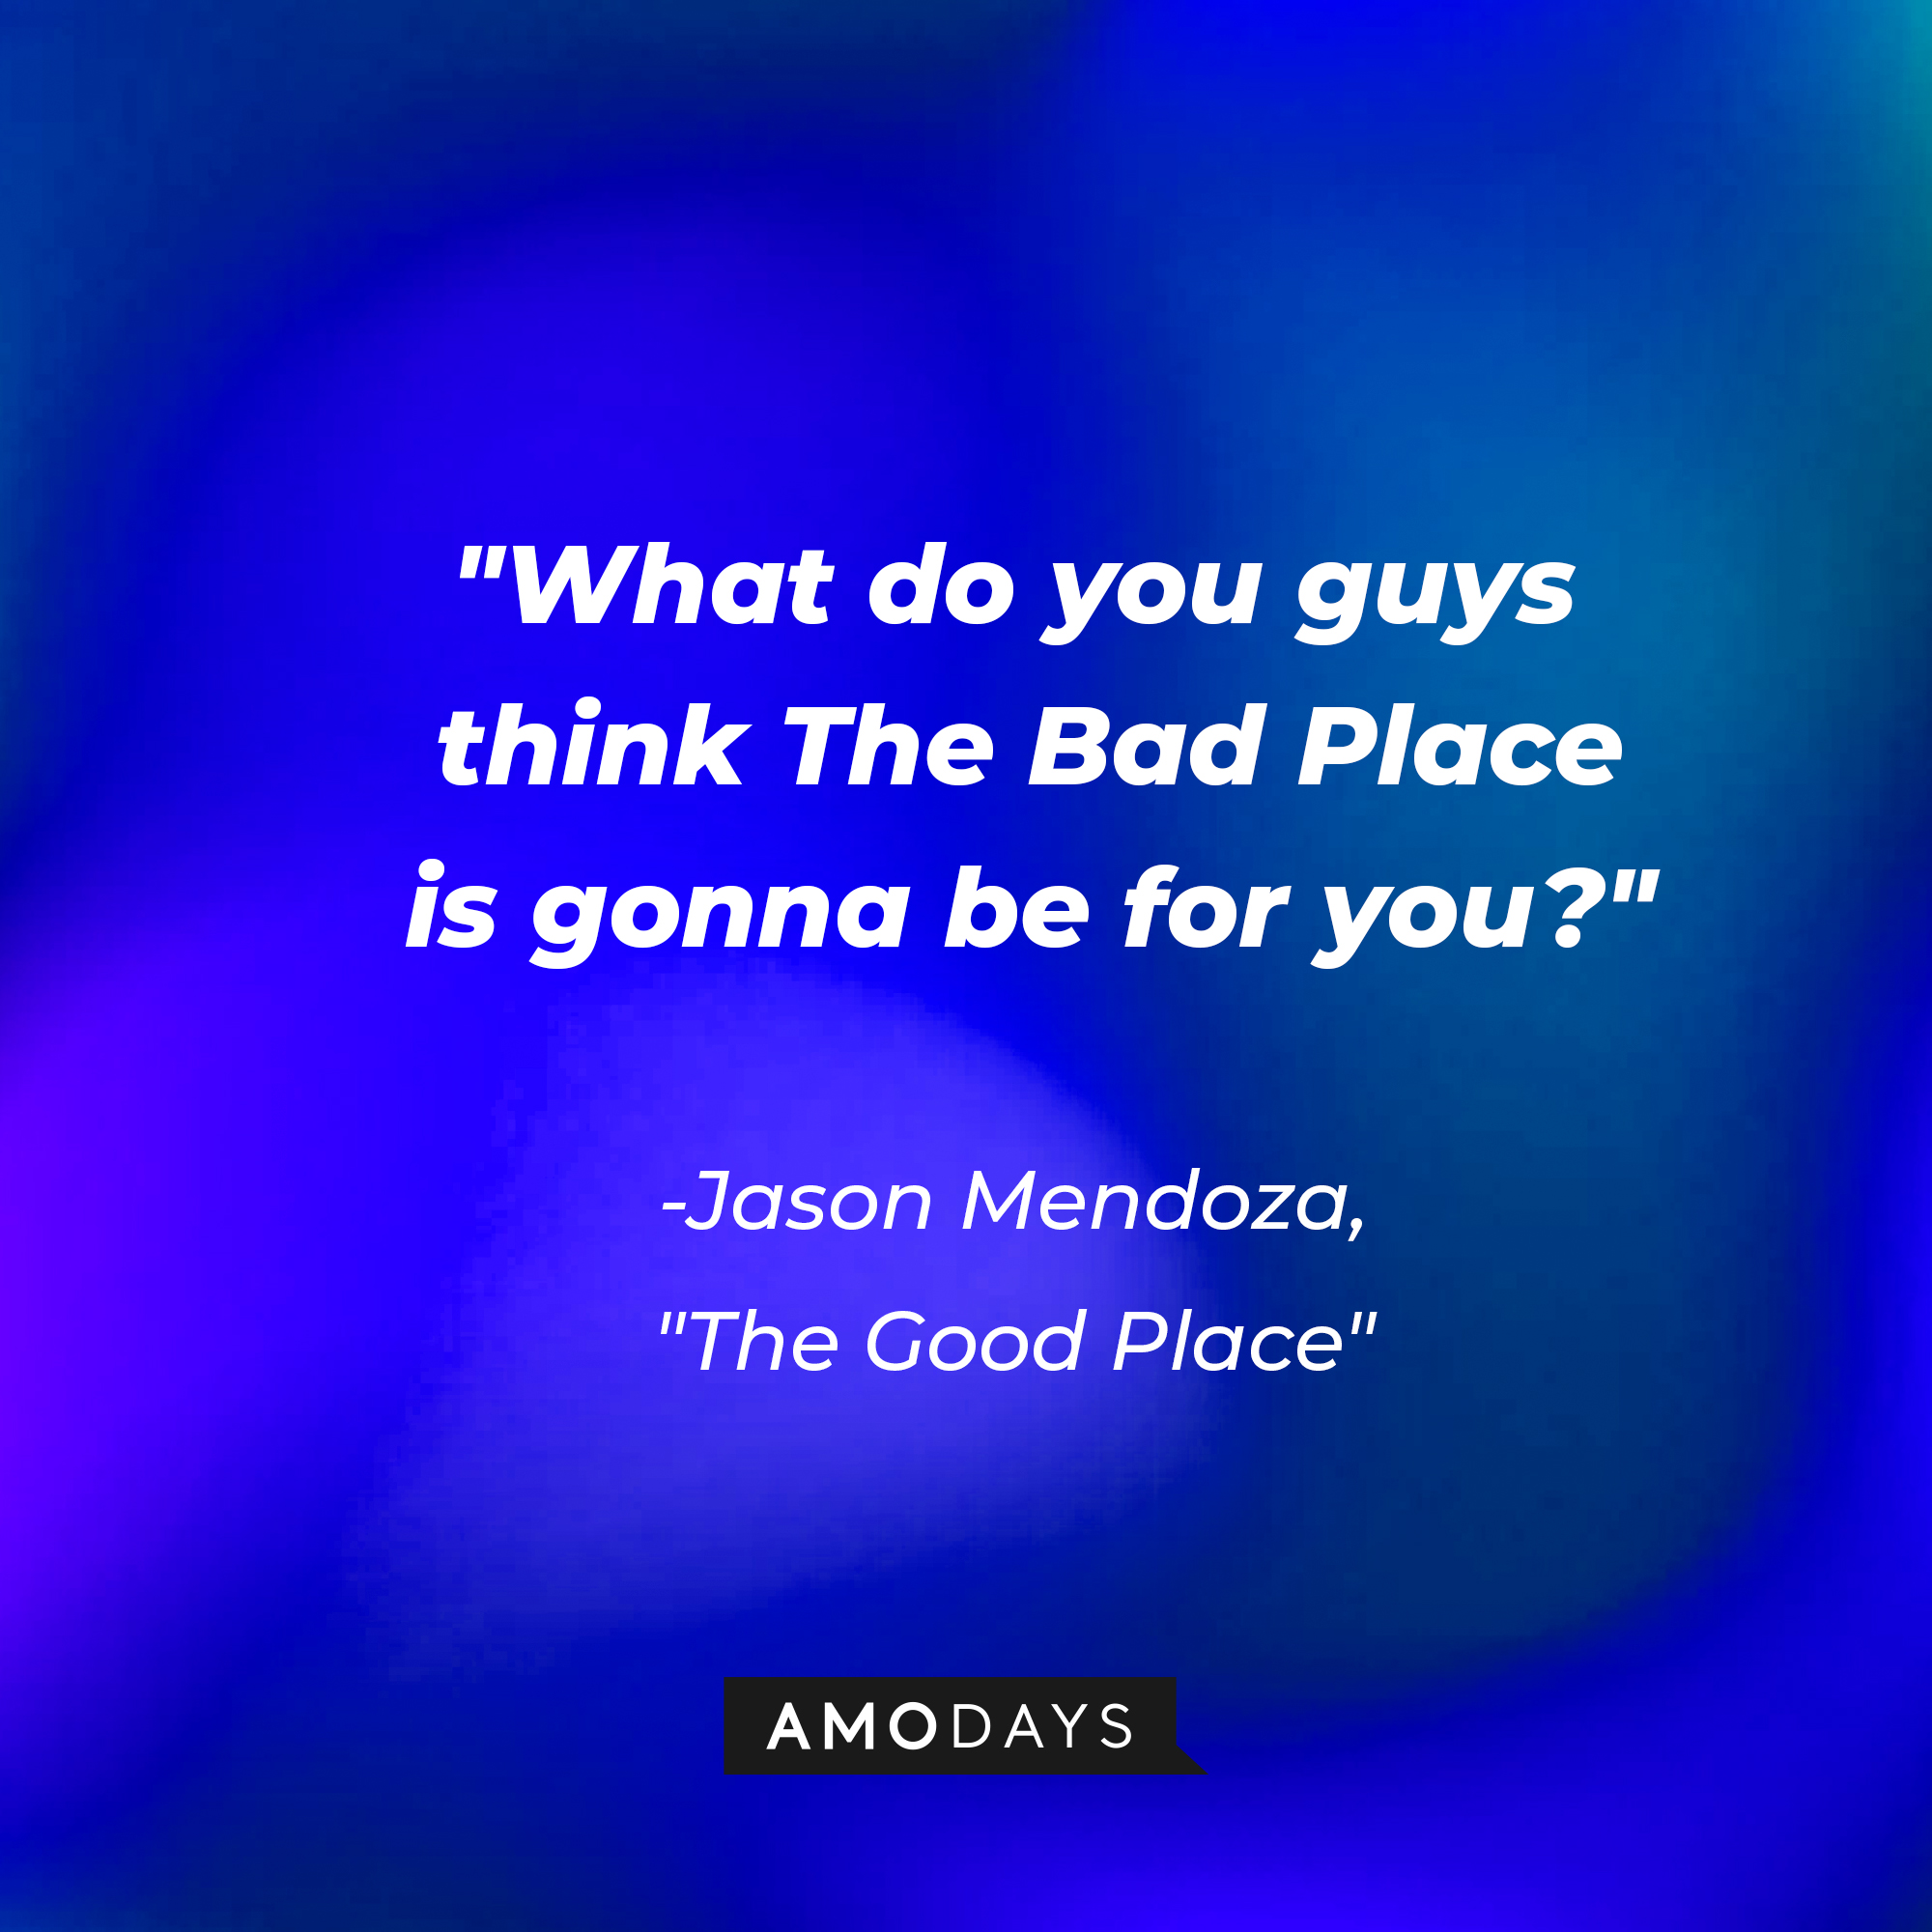 Jason Mendoza's quote in "The Good Place:" “What do you guys think The Bad Place is gonna be for you?” | Source: Amodays